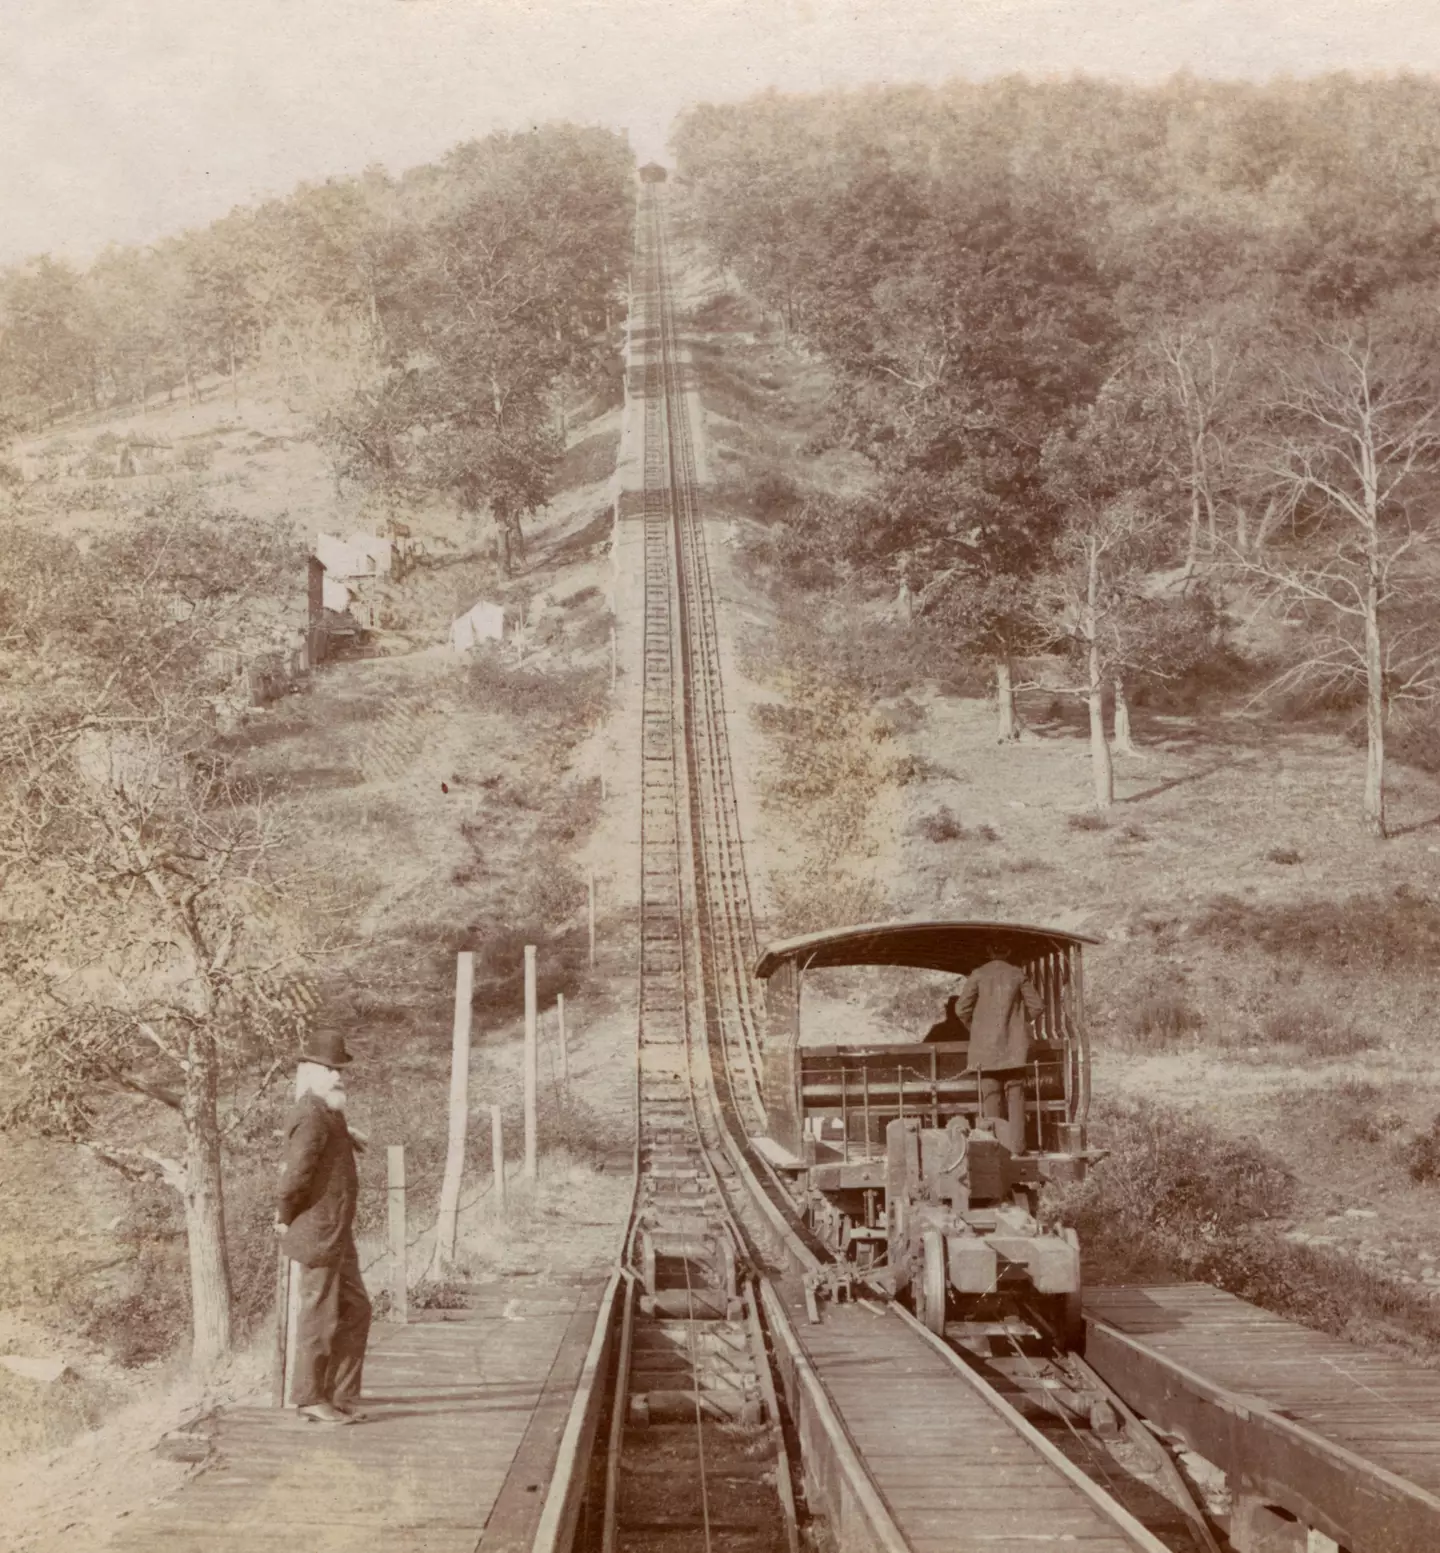 The switchback railway inspired Thompson.